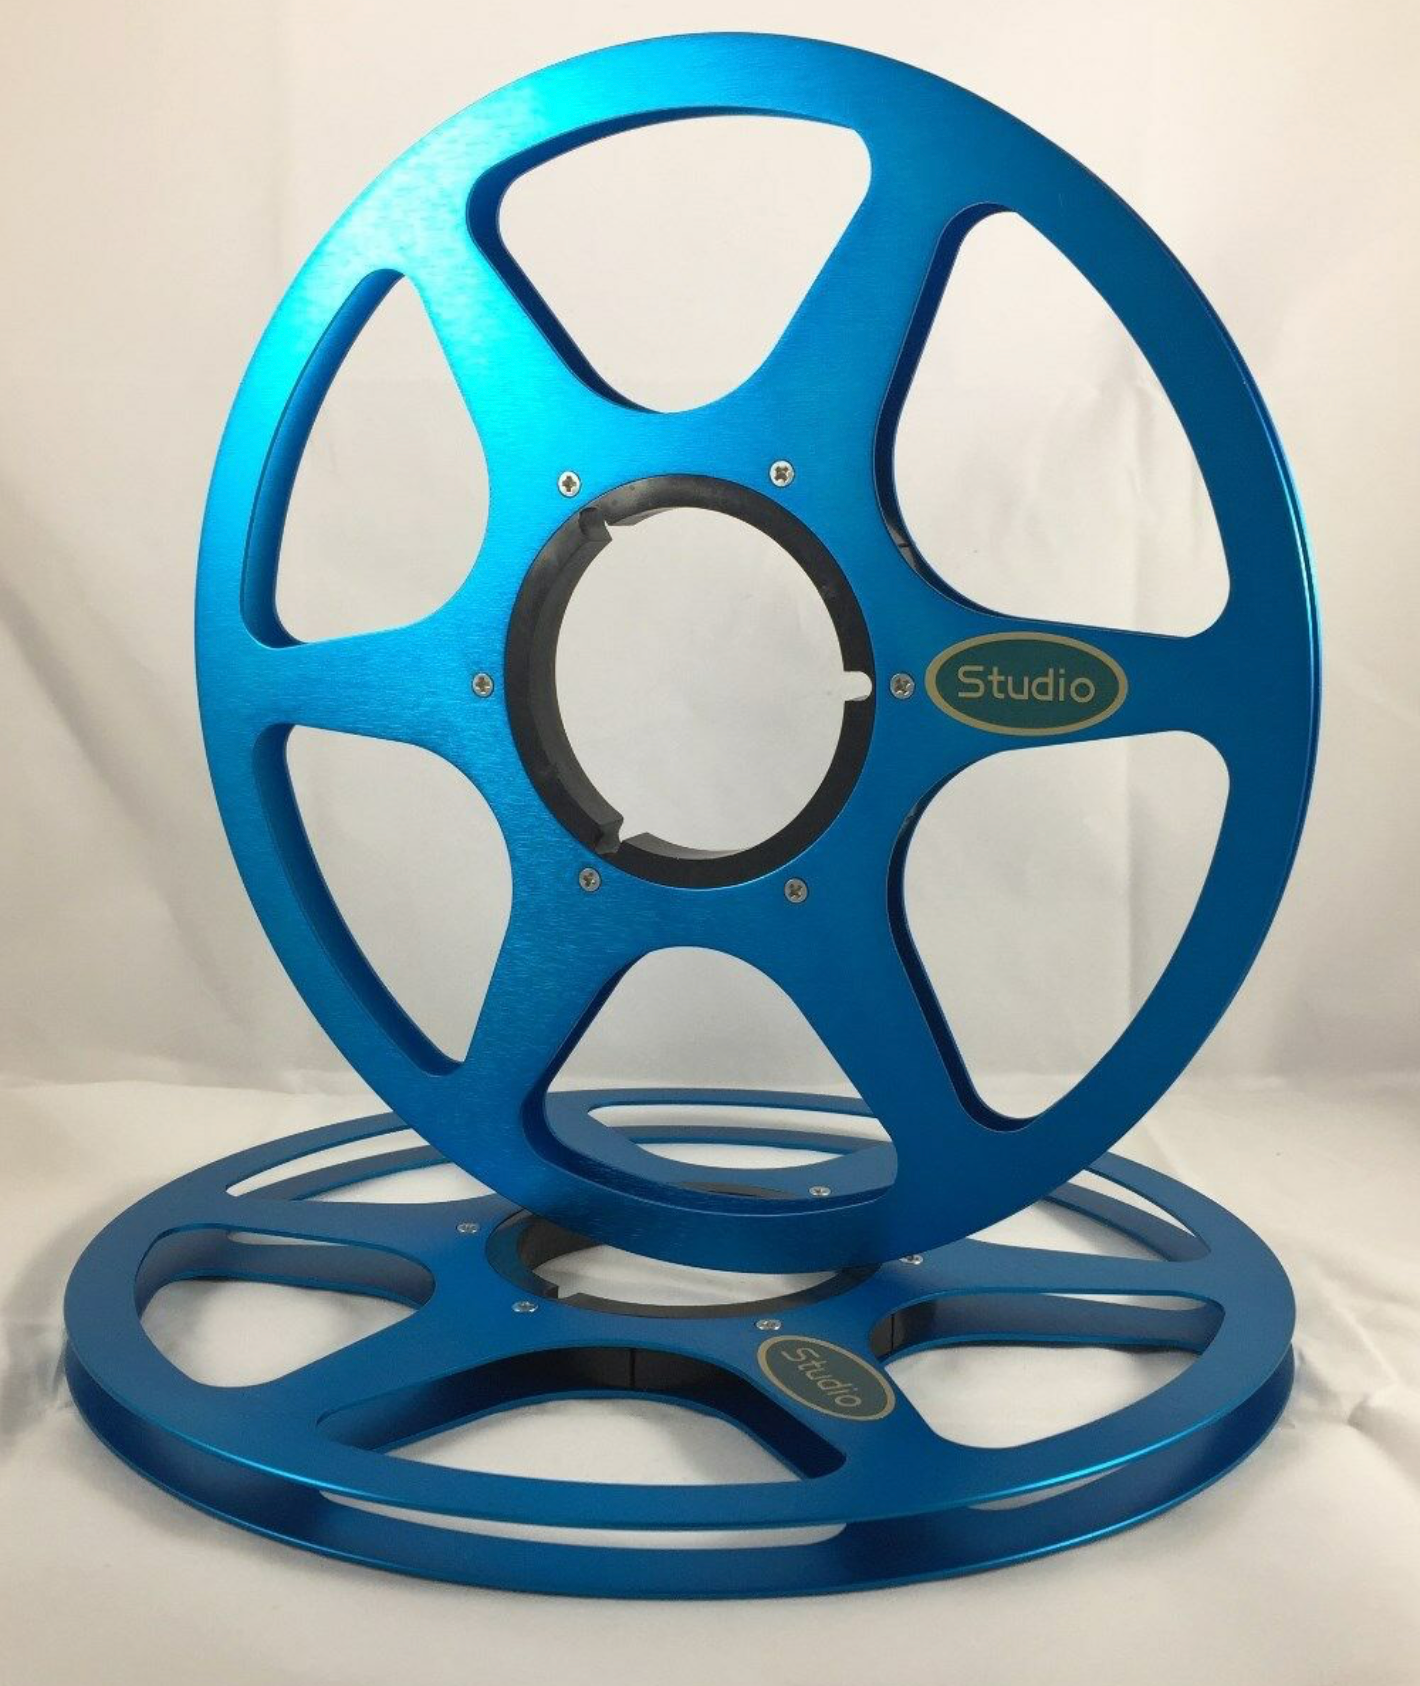 10.5" Anodized Aluminum metal Reel to Reels - ONE PAIR - Blue